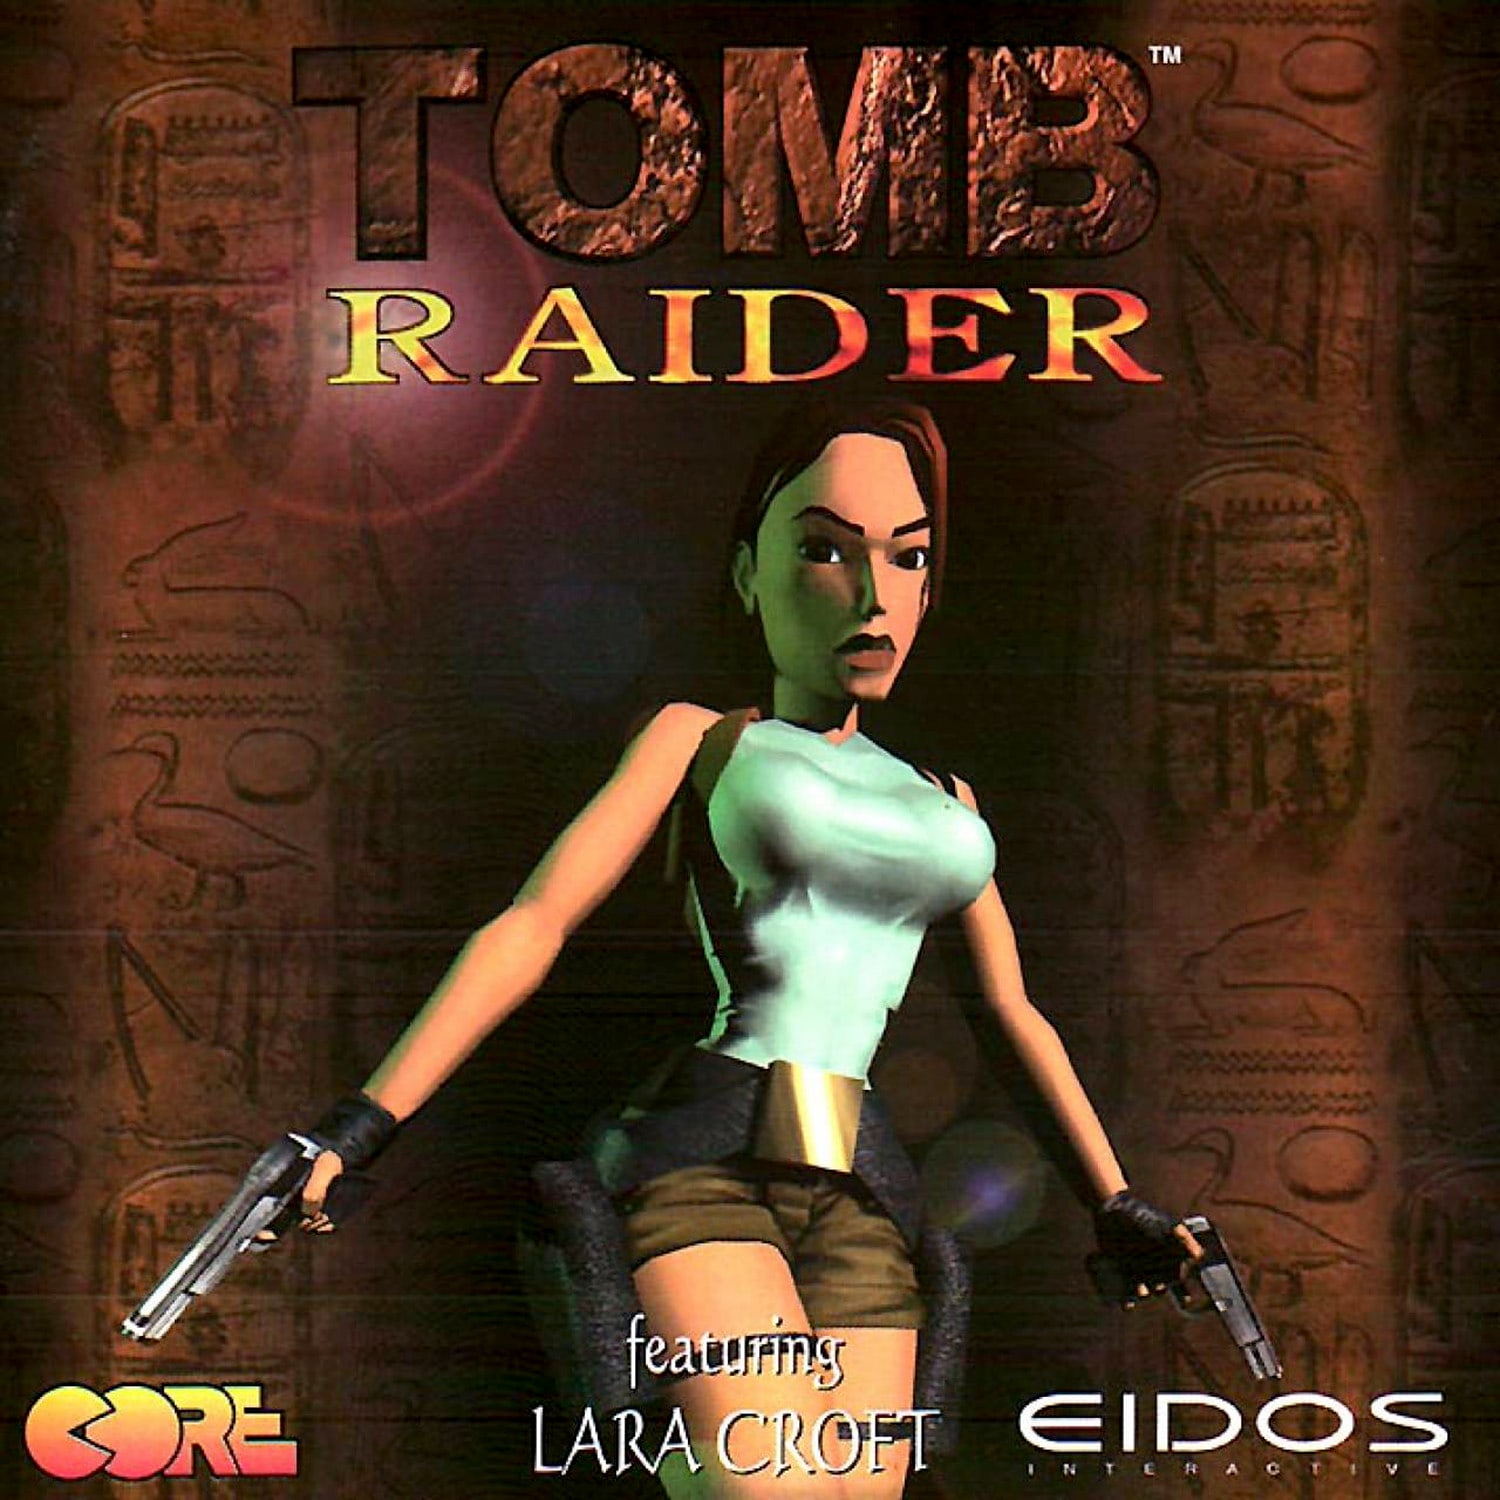 Tomb Raider: New Lara Croft Actress Used to Play the Game in Secret